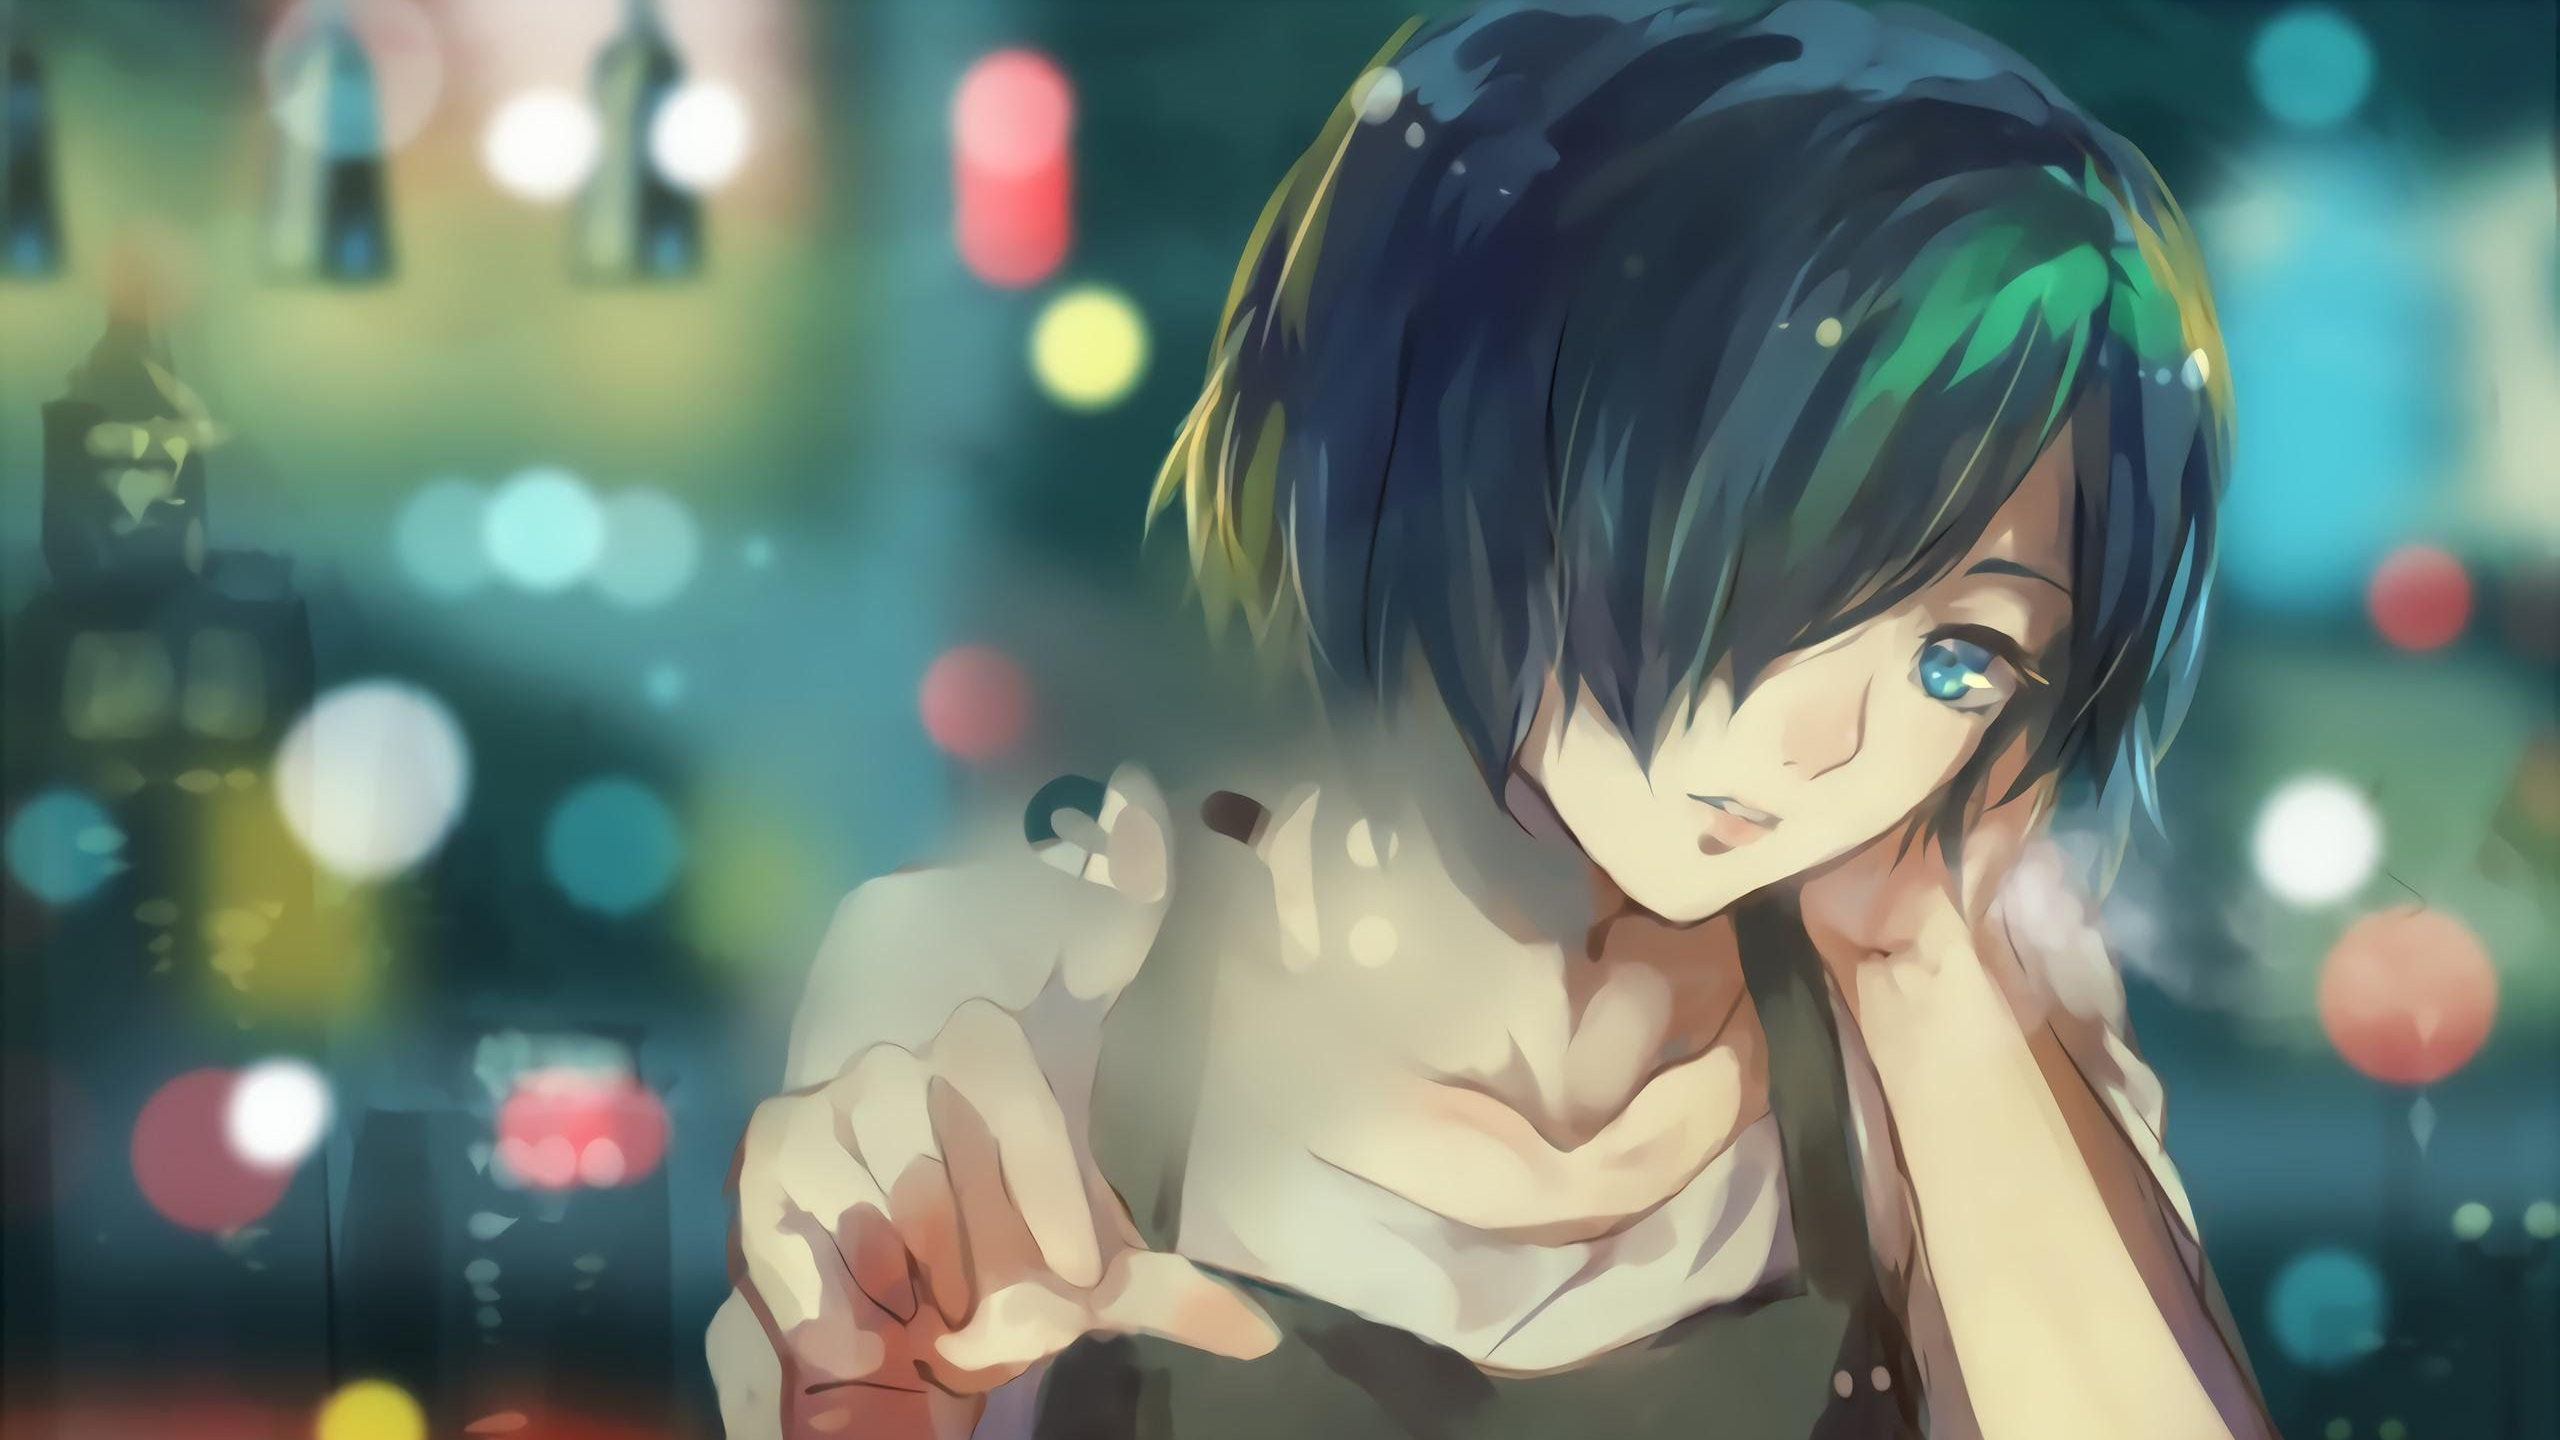 Personnage D'anime Masculin Aux Cheveux Bleus. Wallpaper in 2560x1440 Resolution